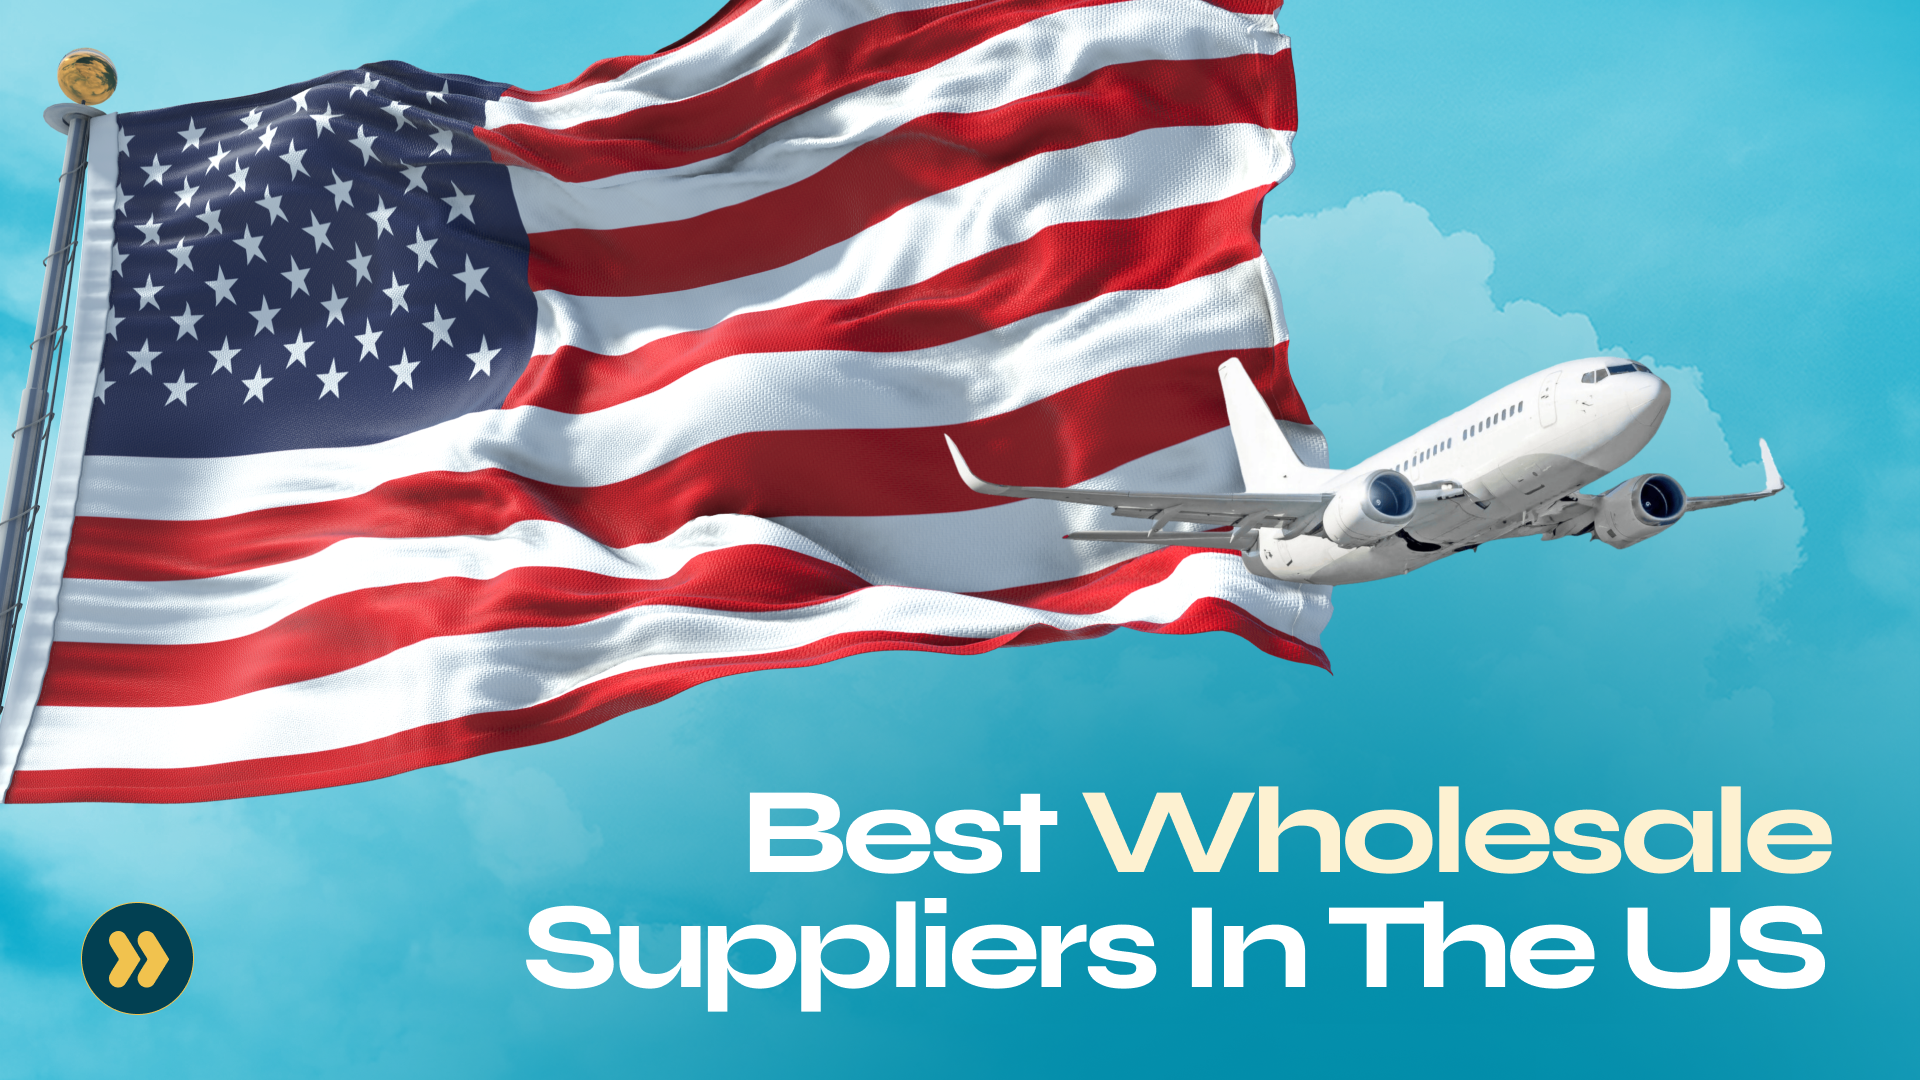 Top 10 Quality Wholesale Suppliers in the US For Every Business Owner